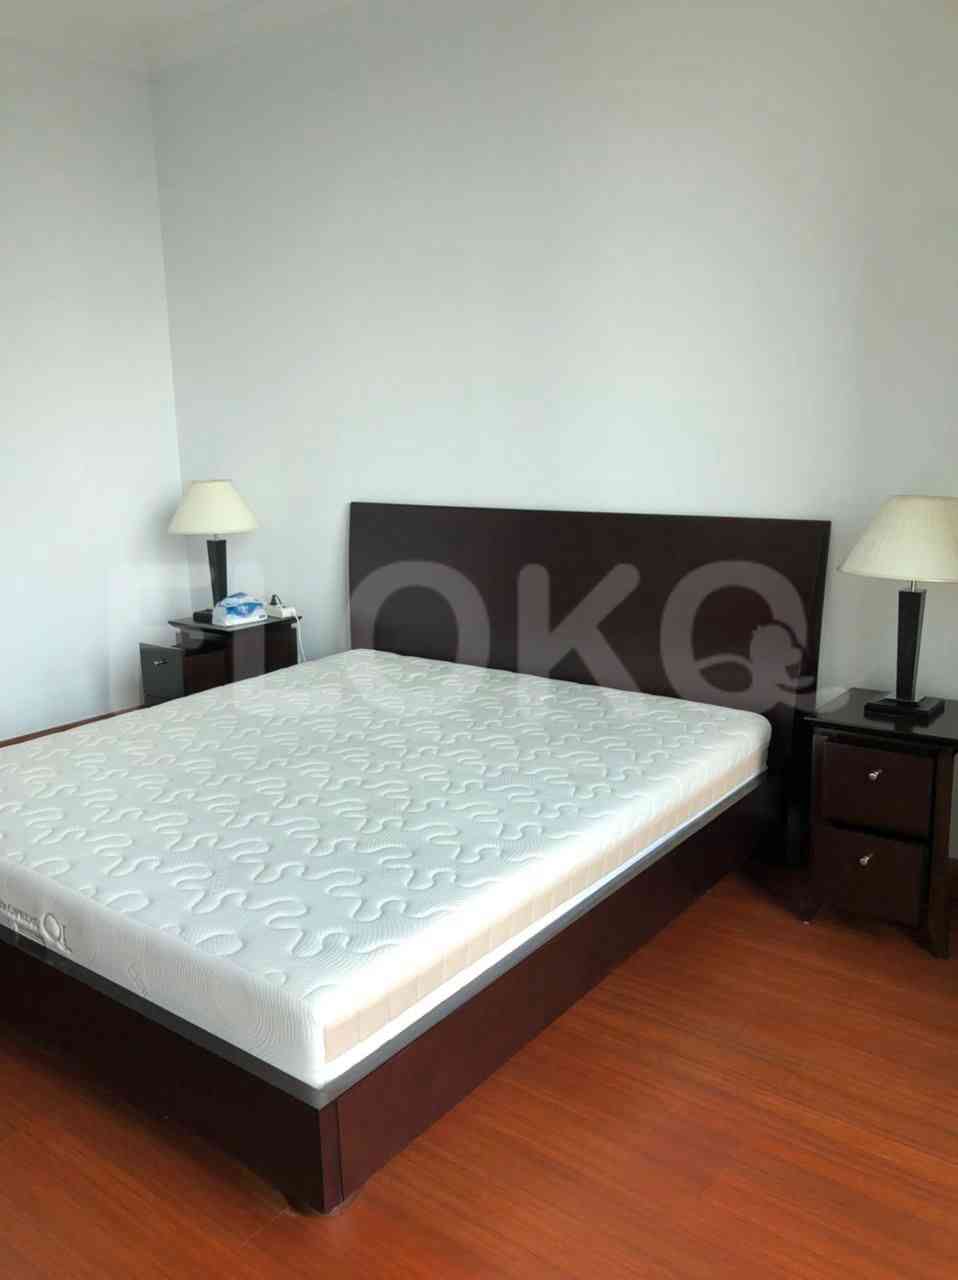 2 Bedroom on 9th Floor for Rent in Pakubuwono View - fga42e 3